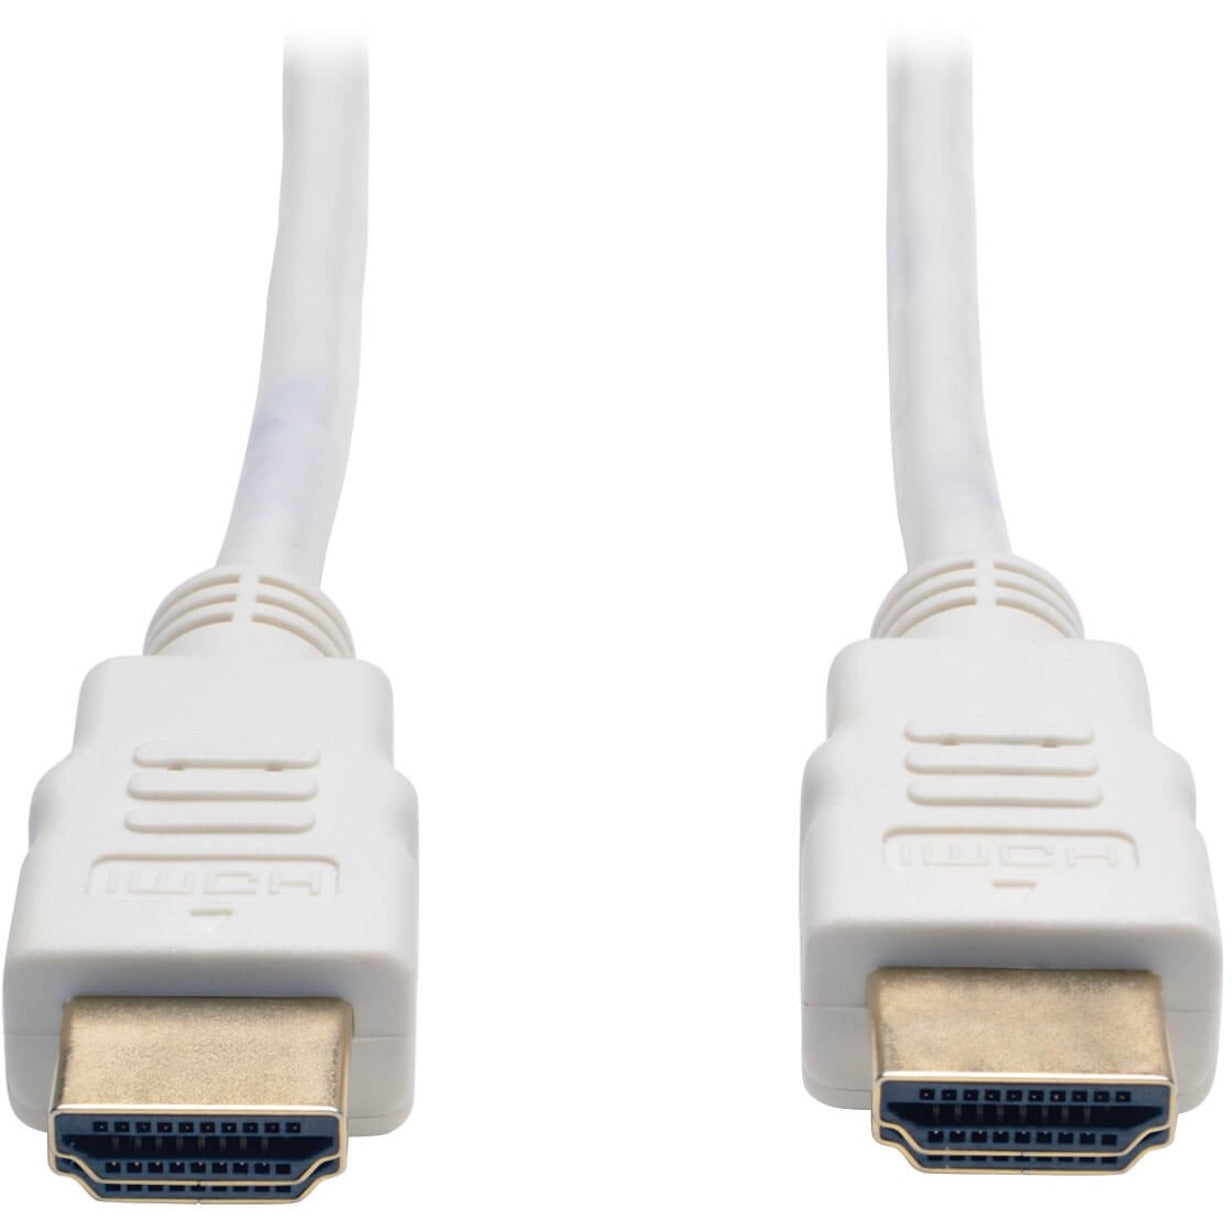 Tripp Lite P568-003-WH High Speed HDMI Cable, Digital Video with Audio (M/M), White, 3-ft